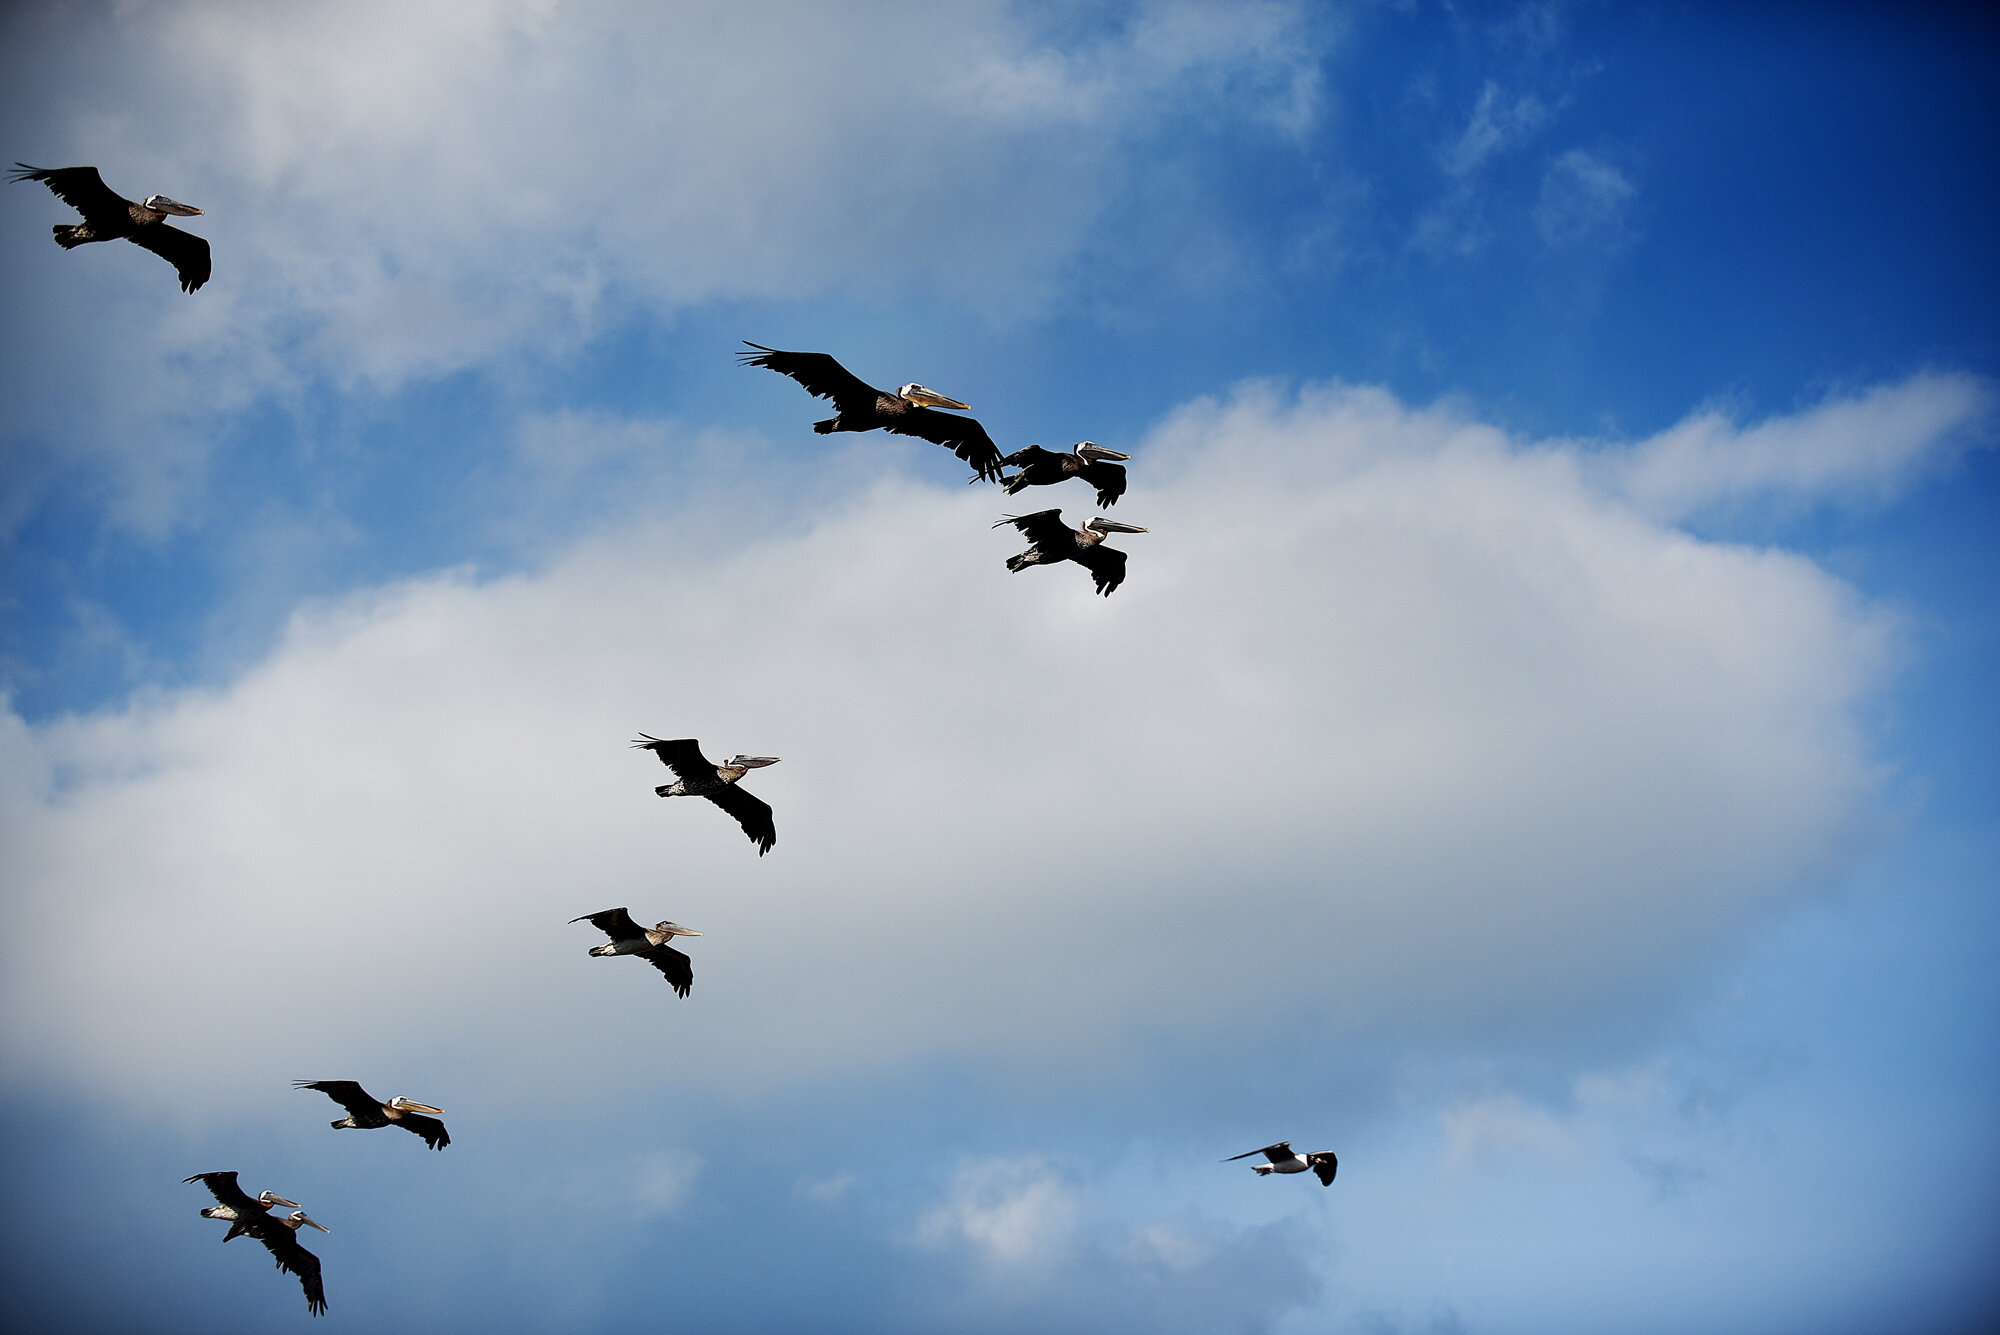 Flocks of brown pelicans kept flying over our house.  I love pelicans.